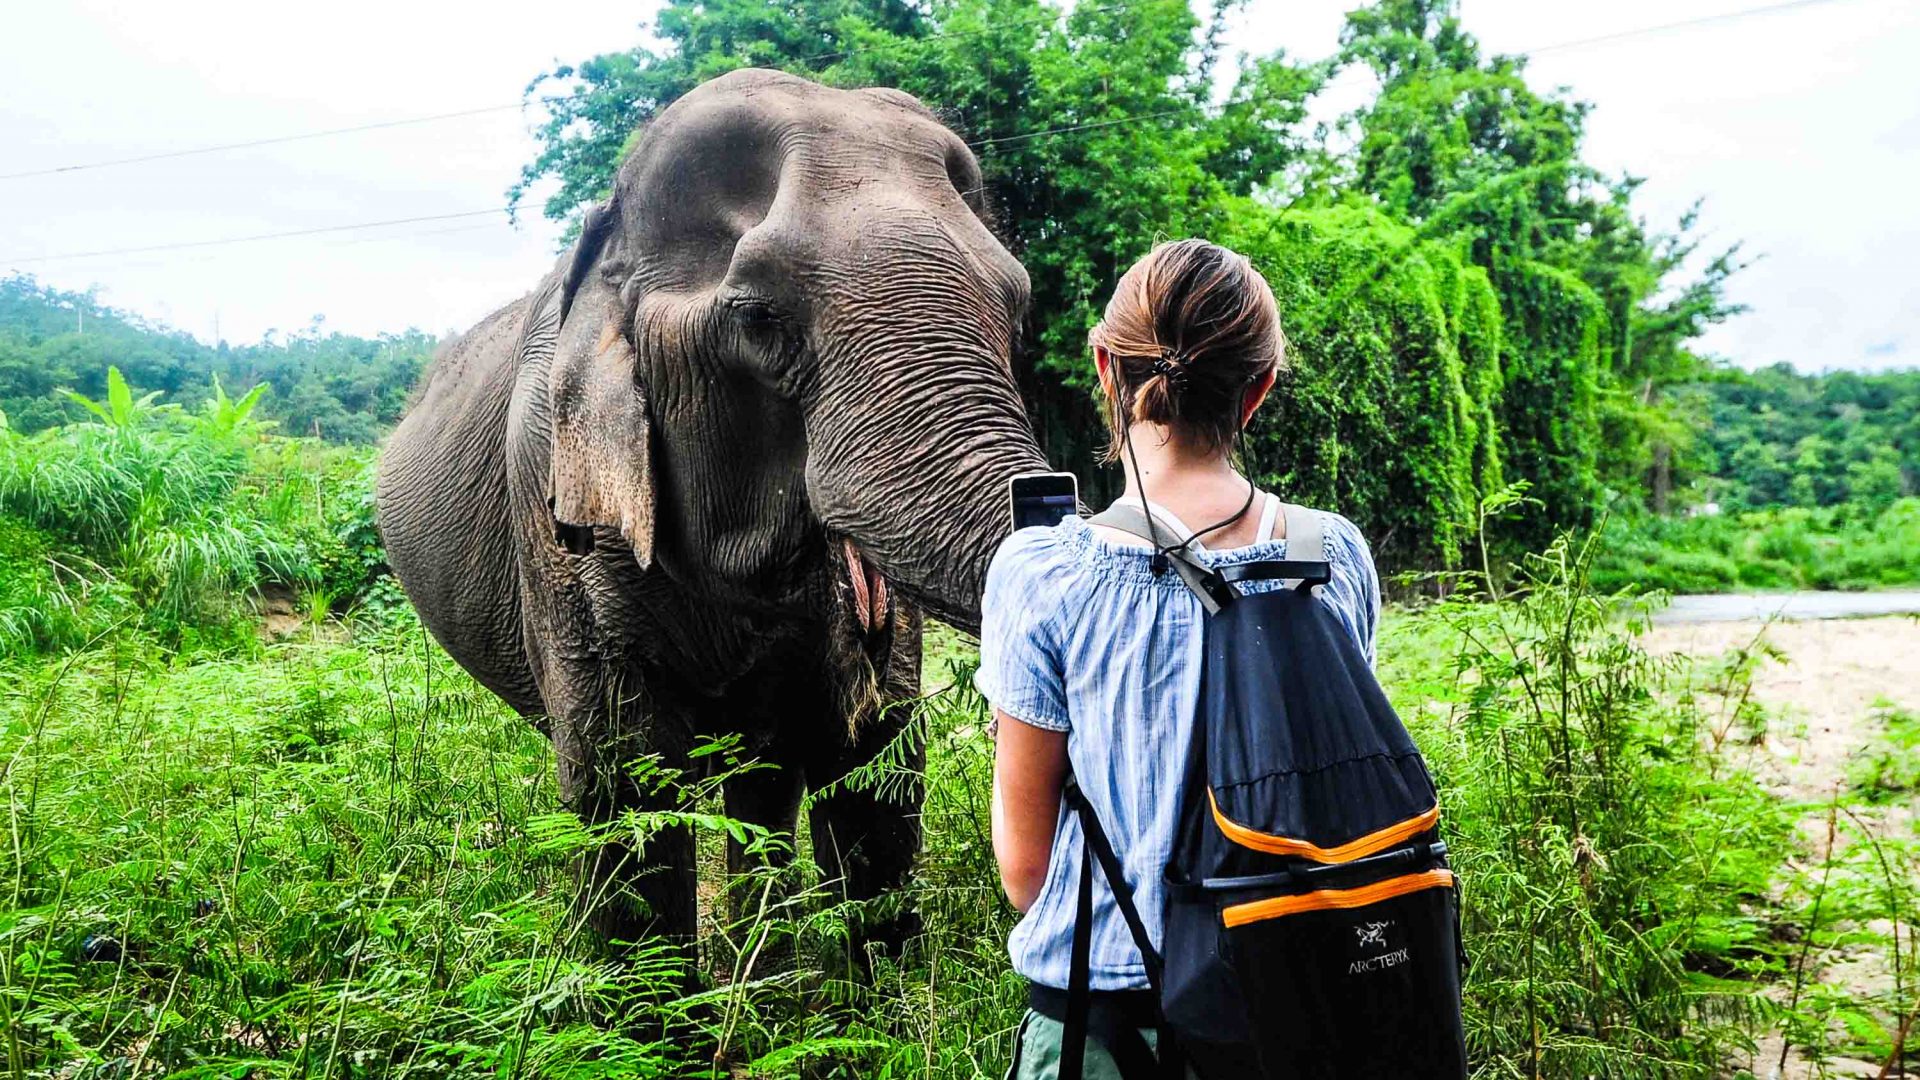 An ENP volunteer admires an elephant and takes a photo on their phone.